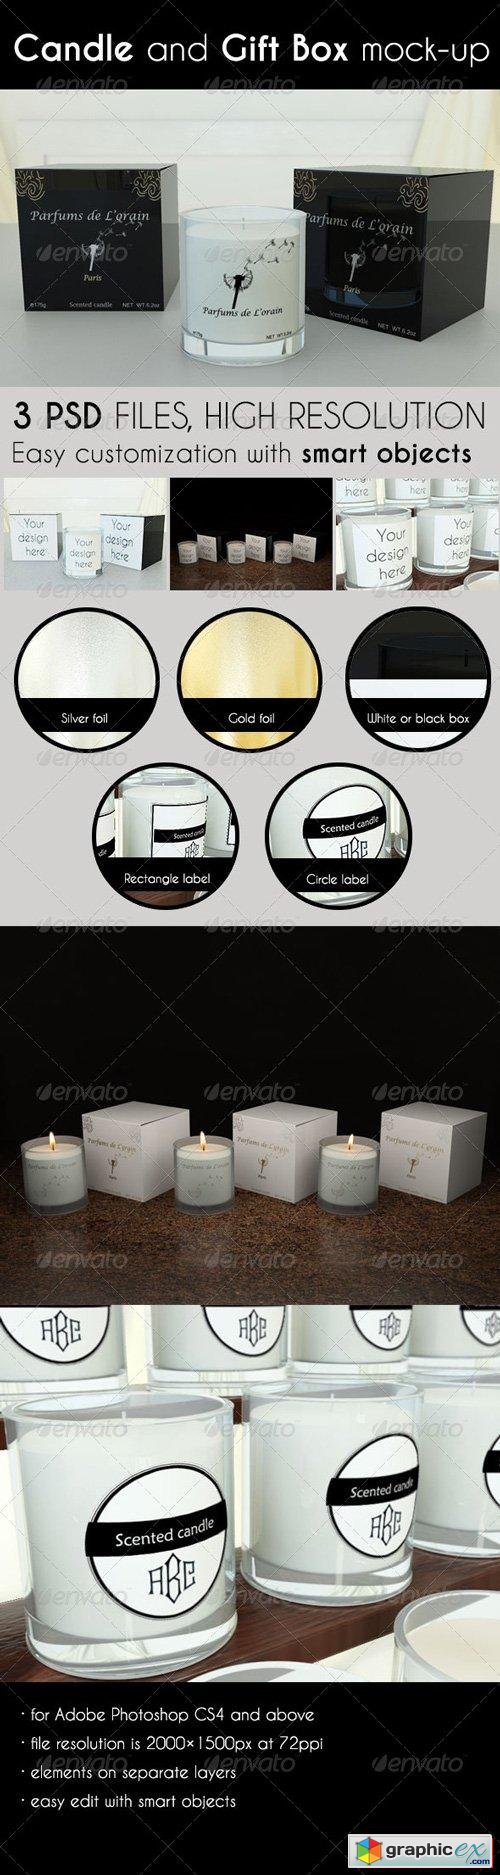 Candle and Gift Box Mock-Up 